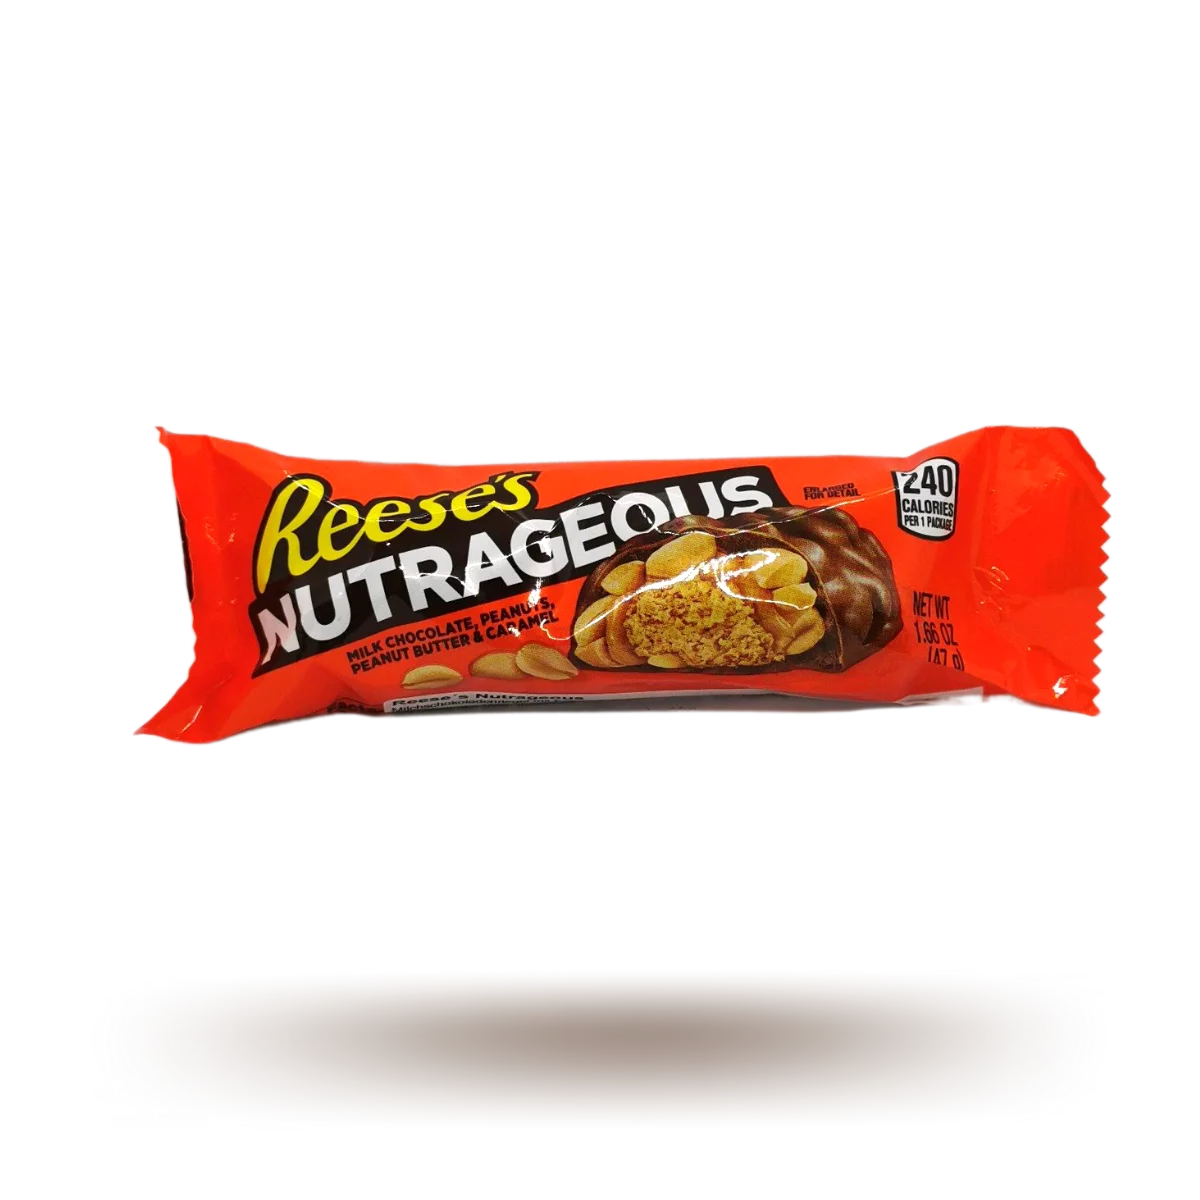 Reese's Nutrageous – CandySpeed